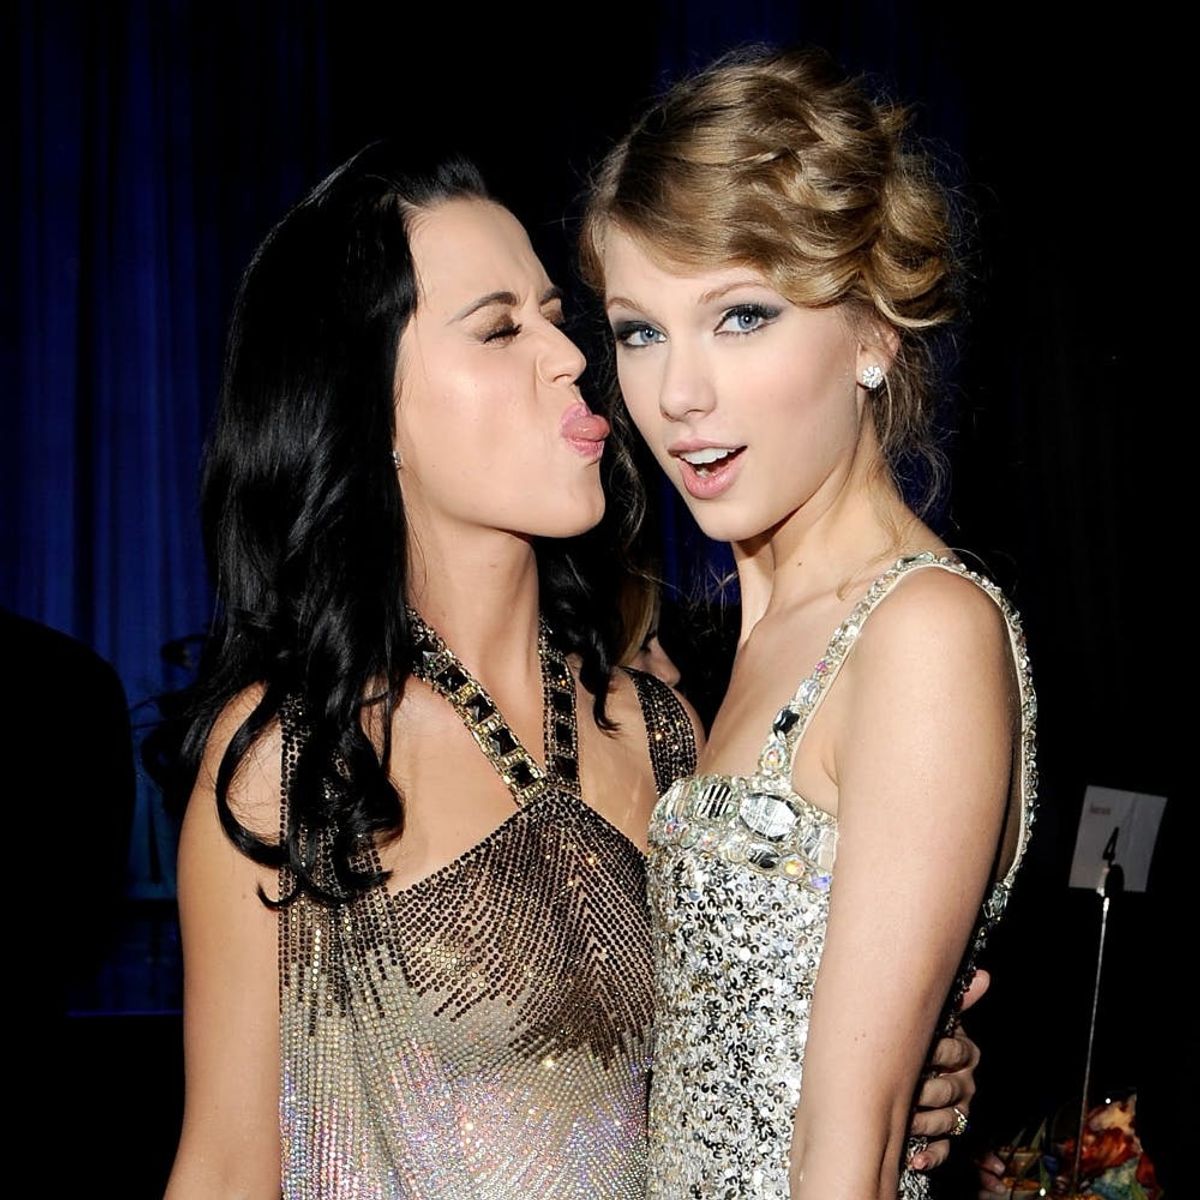 Katy Perry Says Taylor Swift Tried to “Assassinate” Her Character